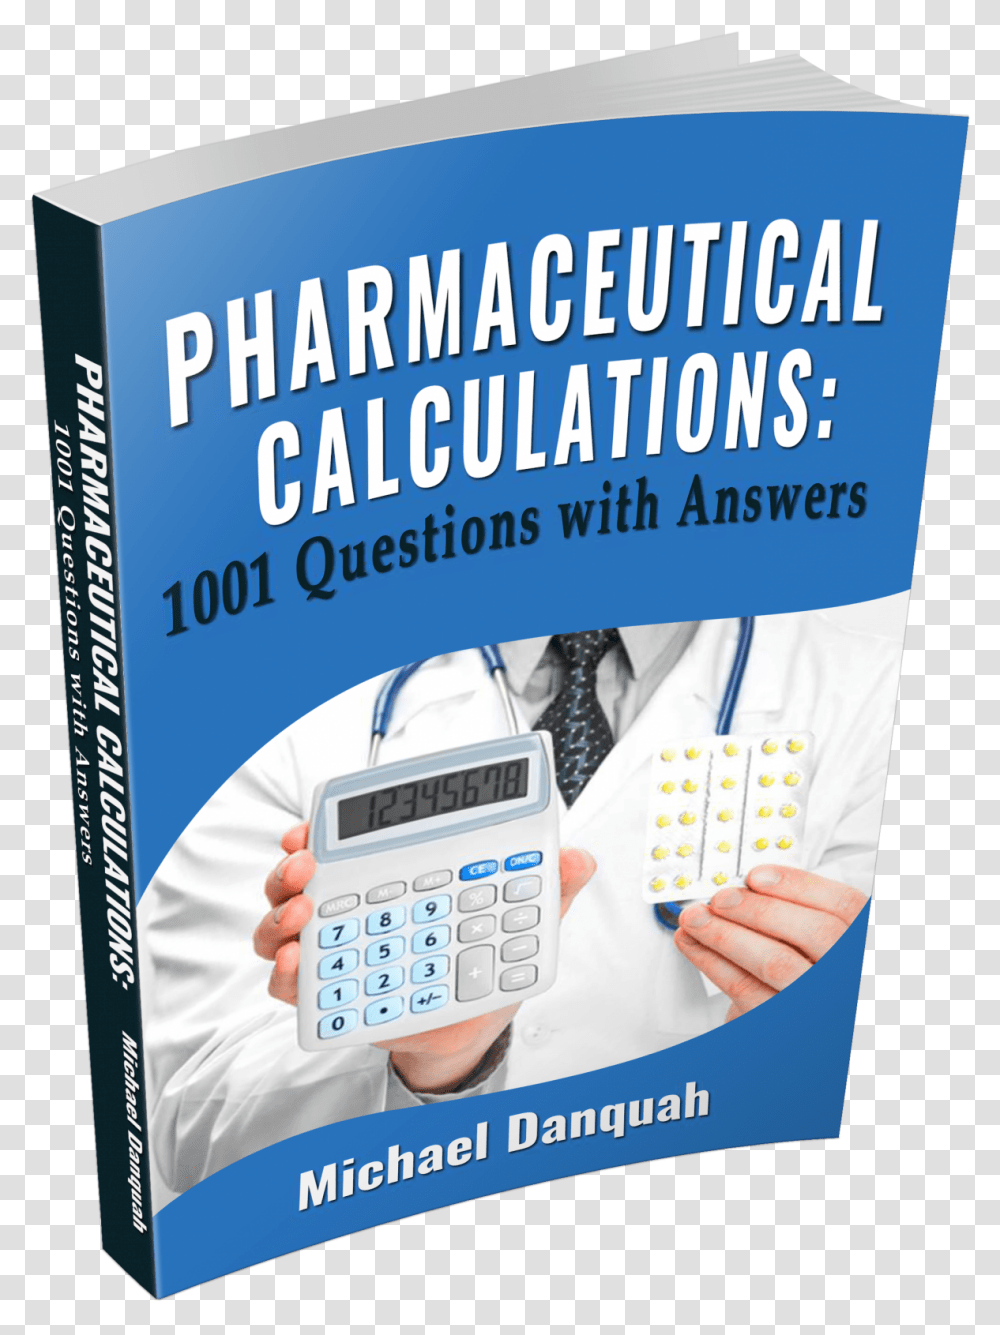 Pharmaceutical Calculations 1001 Questions With Answers Poster, Tie, Accessories, Mobile Phone, Electronics Transparent Png